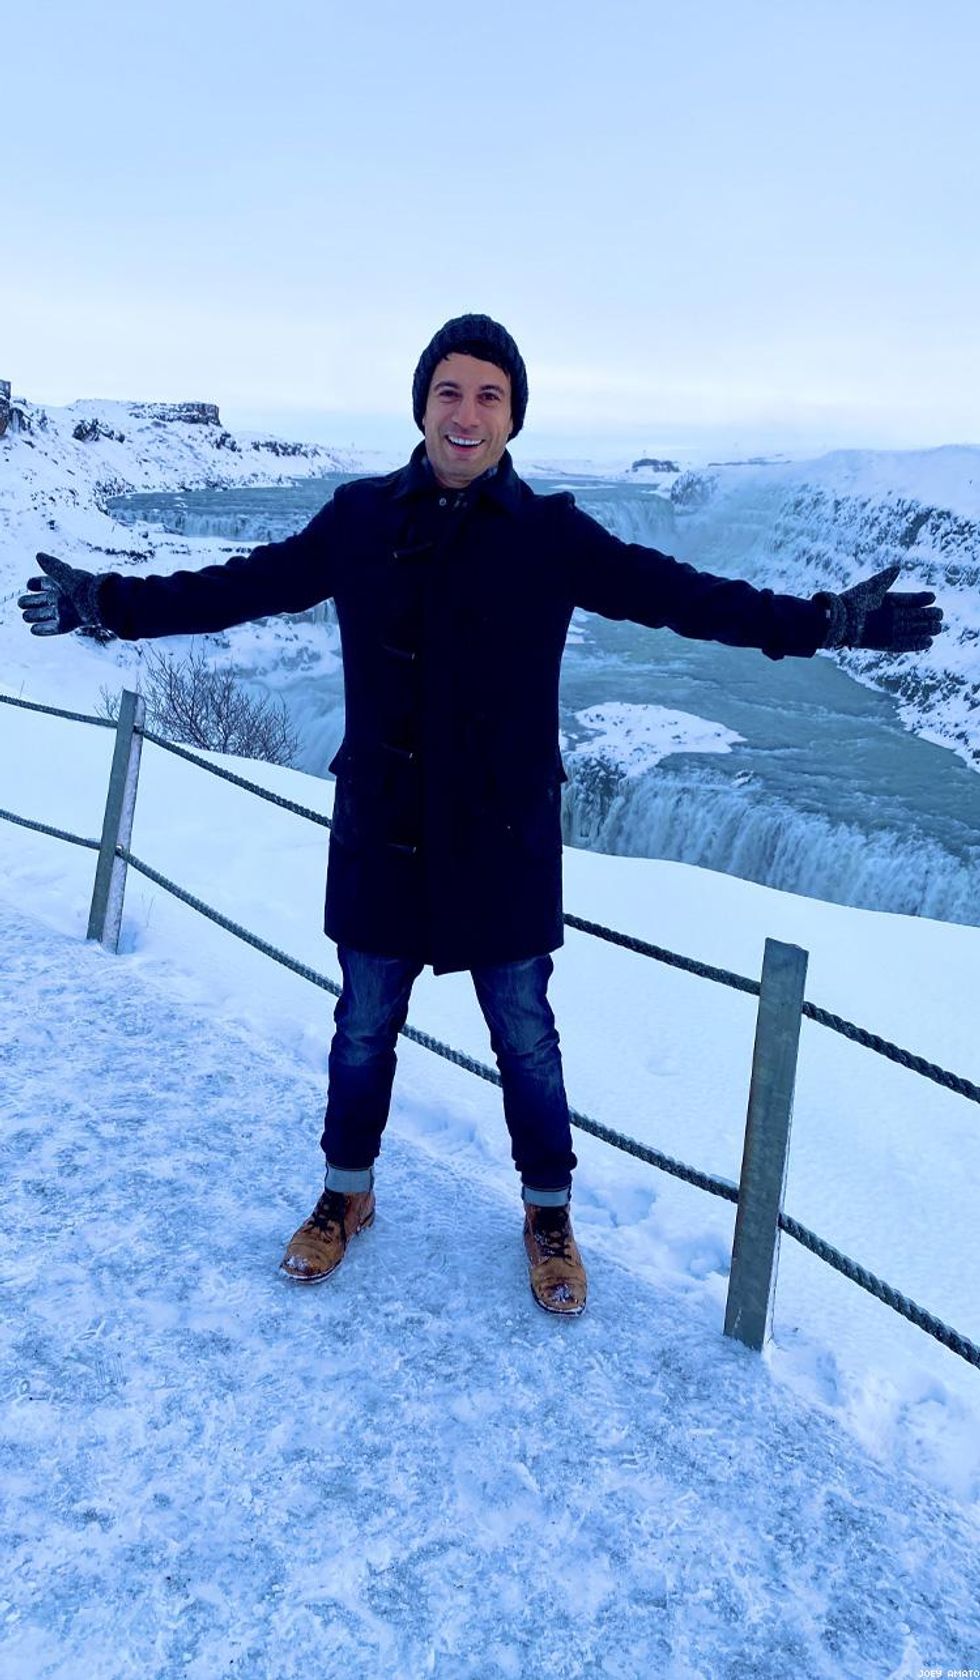 Joey Amato at Gulifoss in Iceland